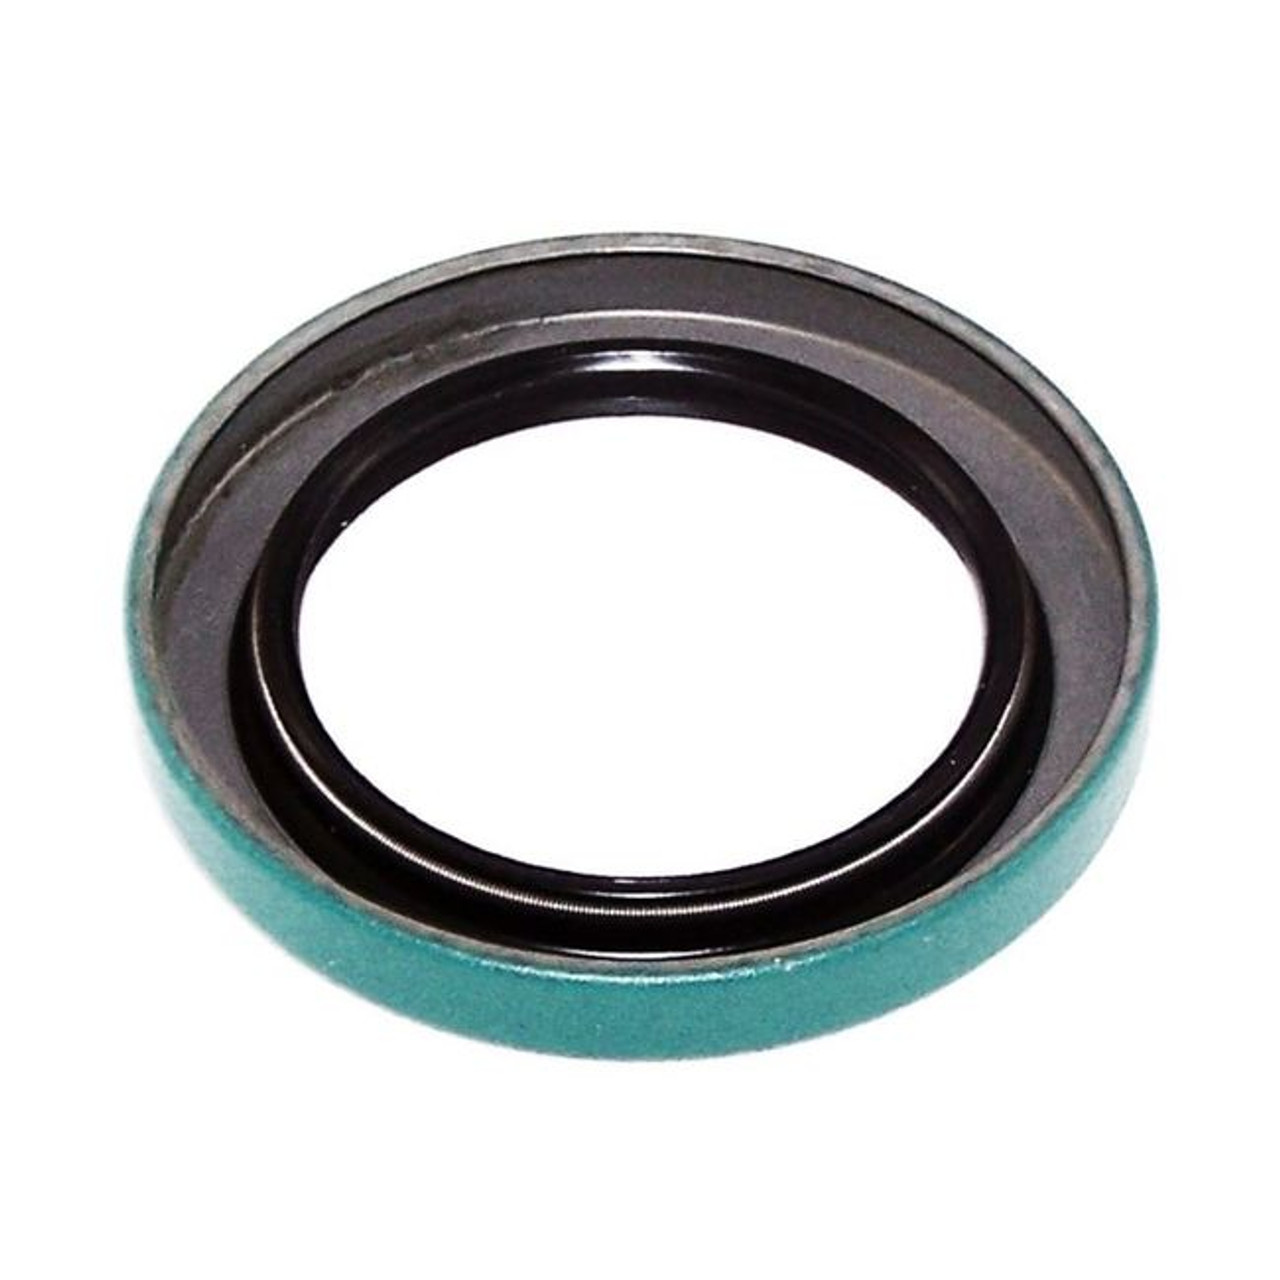 A&I Brand JD Seal AT16431 Fits 830 (3 Cylinder), 930, 1020, 1120, 1130, 1830, 2010